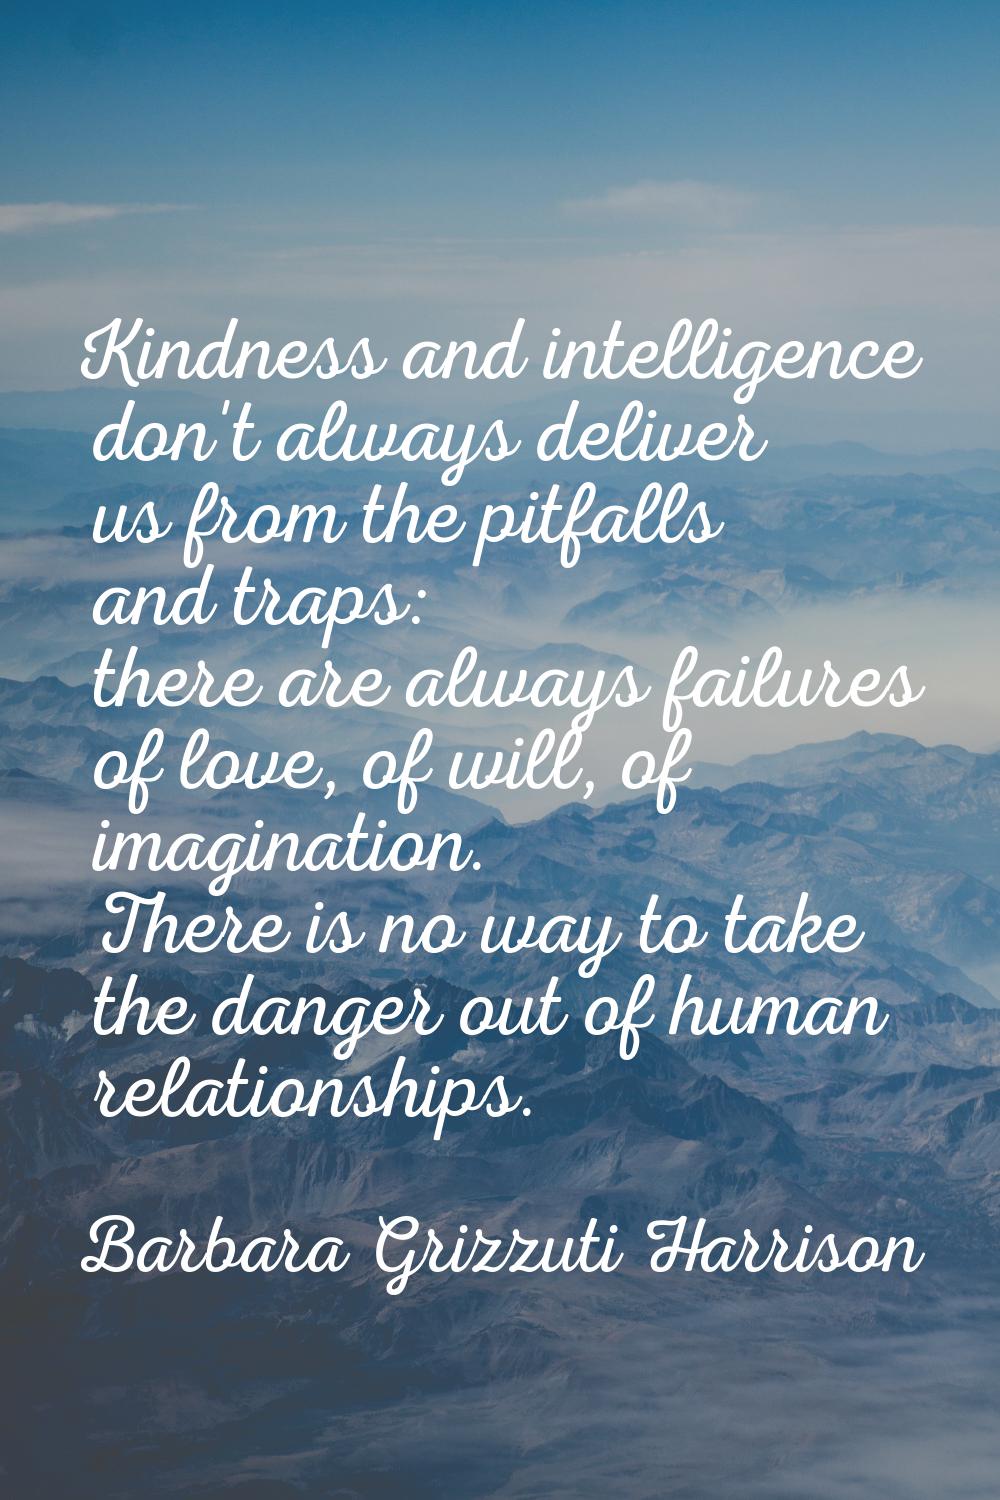 Kindness and intelligence don't always deliver us from the pitfalls and traps: there are always fai